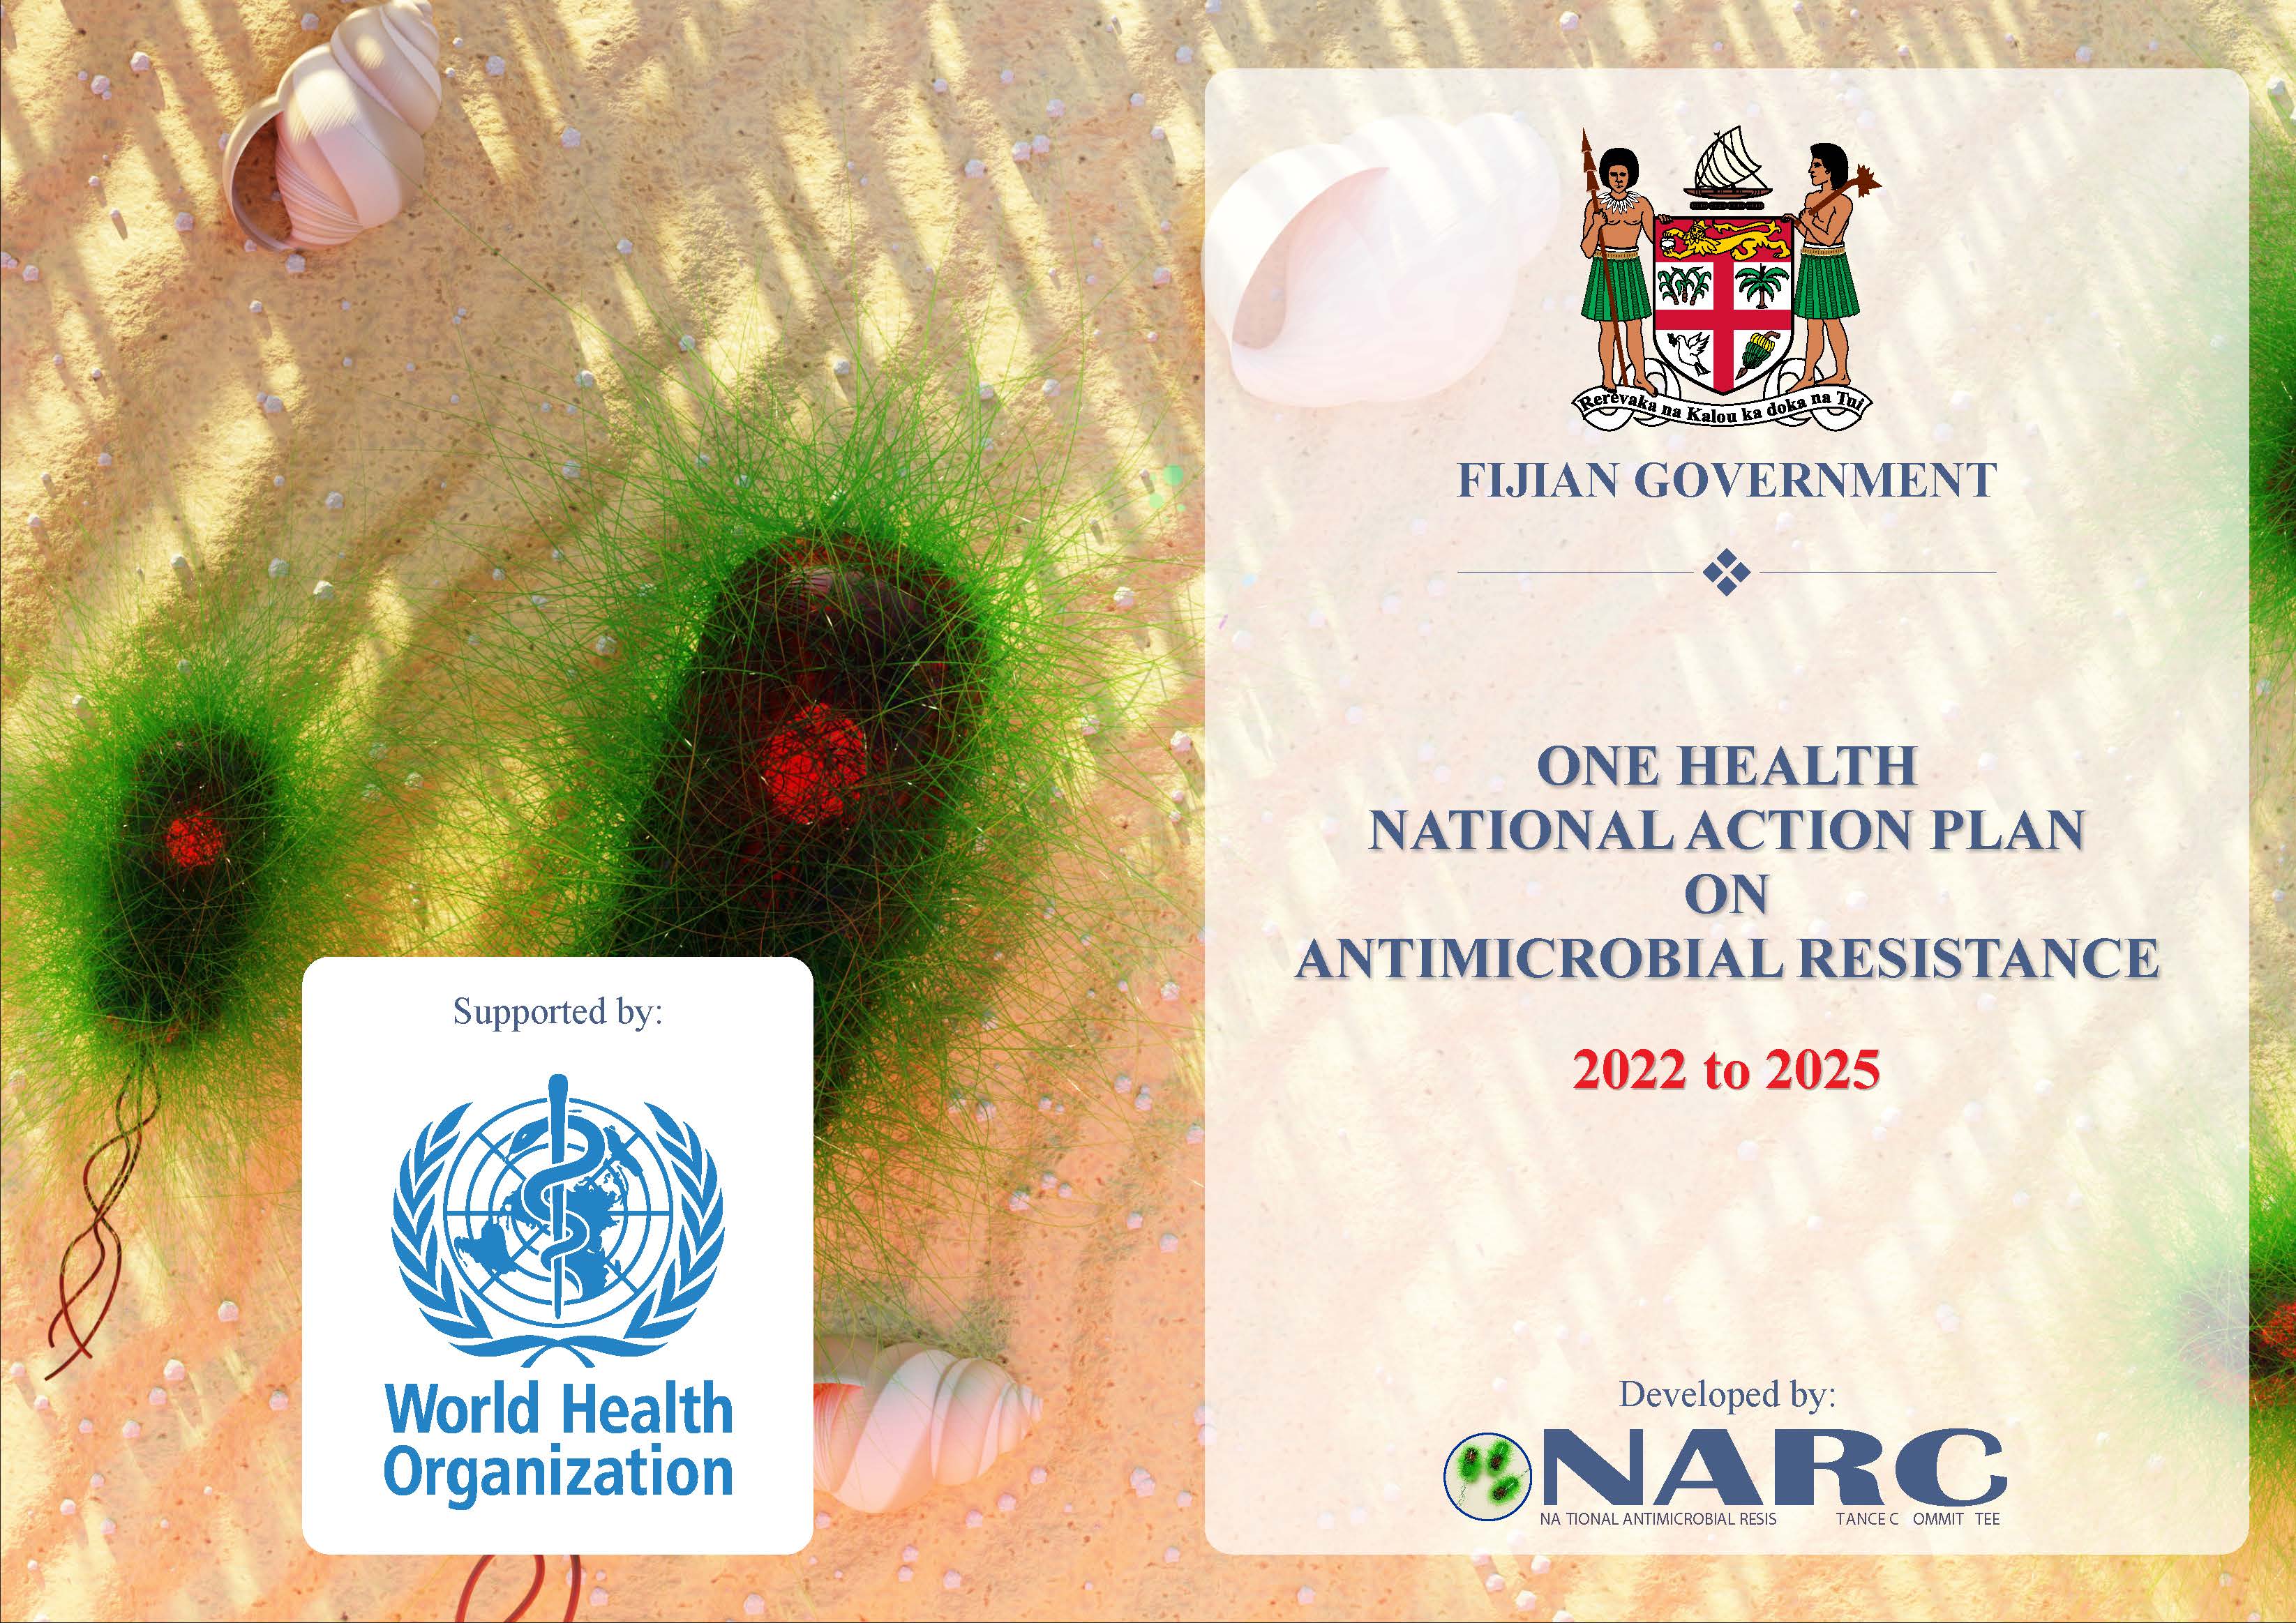 Fijian Government One Health National Action Plan on Antimicrobial Resistance 2022 to 2025